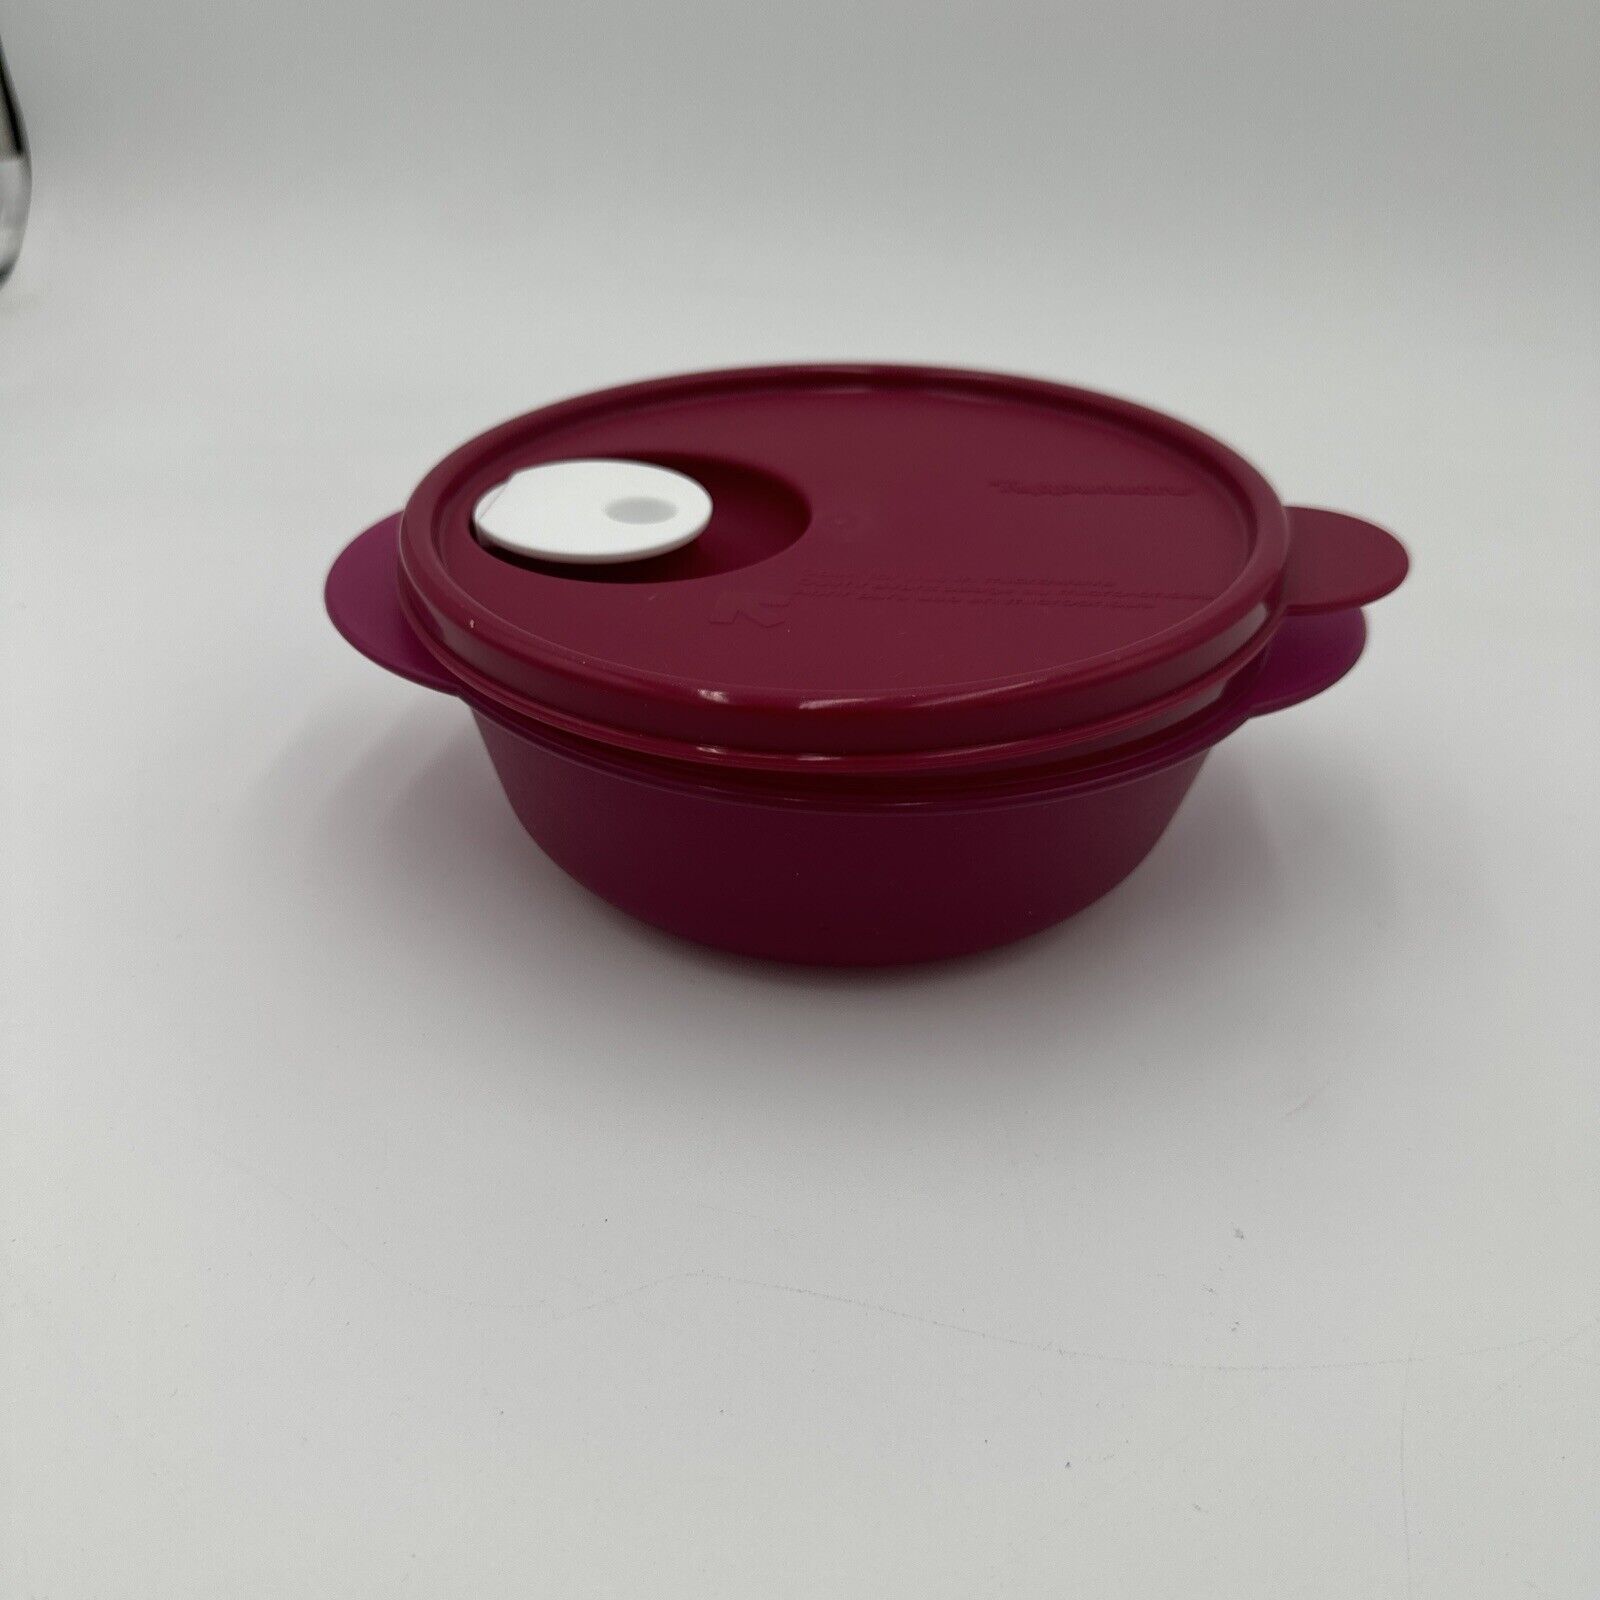 Tupperware Crystalwave Round Container 2 1/4 Cups Microwave Bowl Rhubarb New